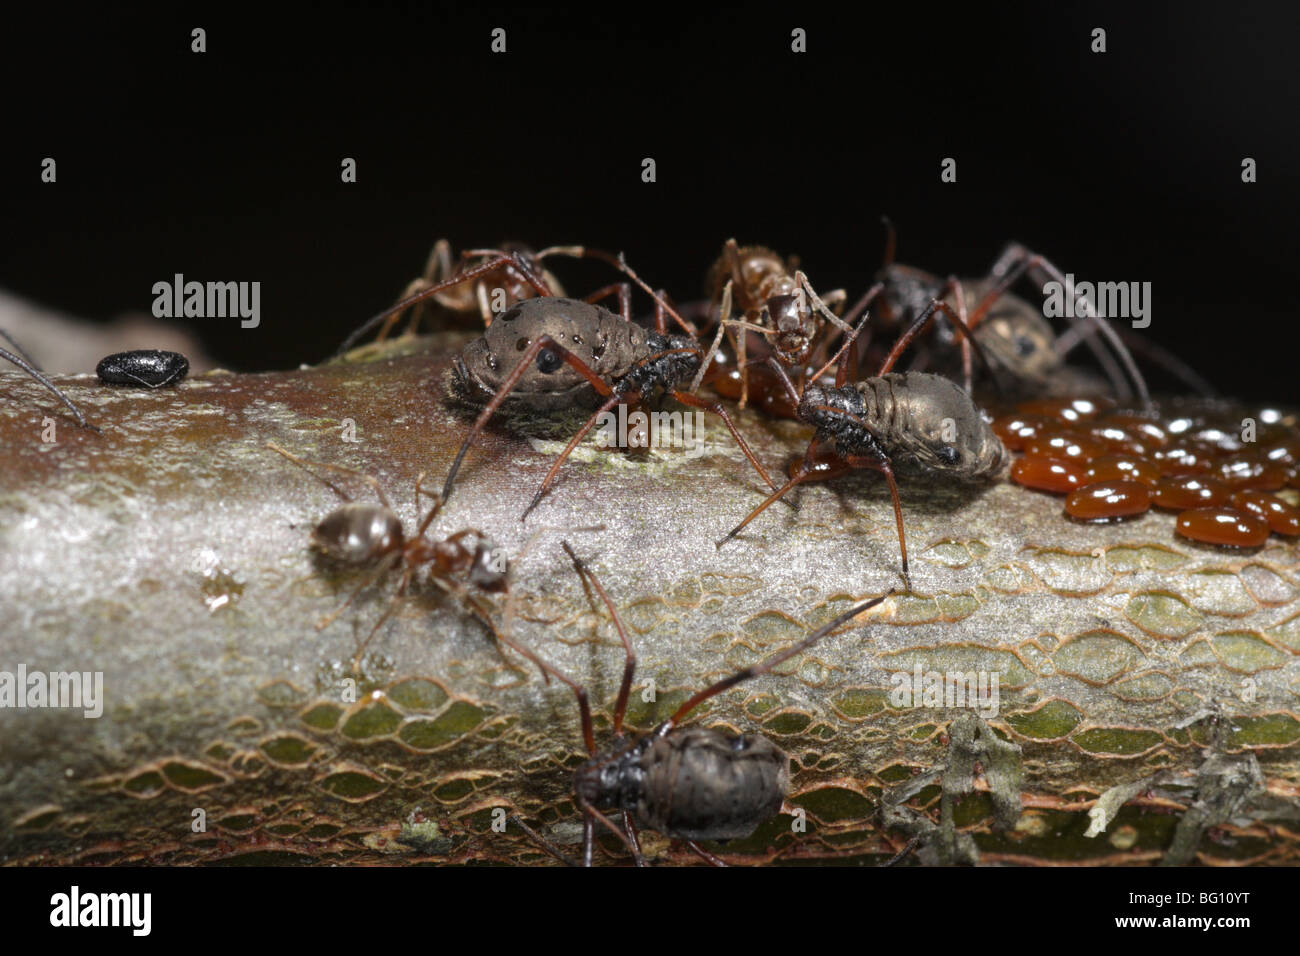 Aphids (Lachnus roboris) on an oak. They have laid eggs and are being guarded and milked by ants (Lasius niger) Stock Photo